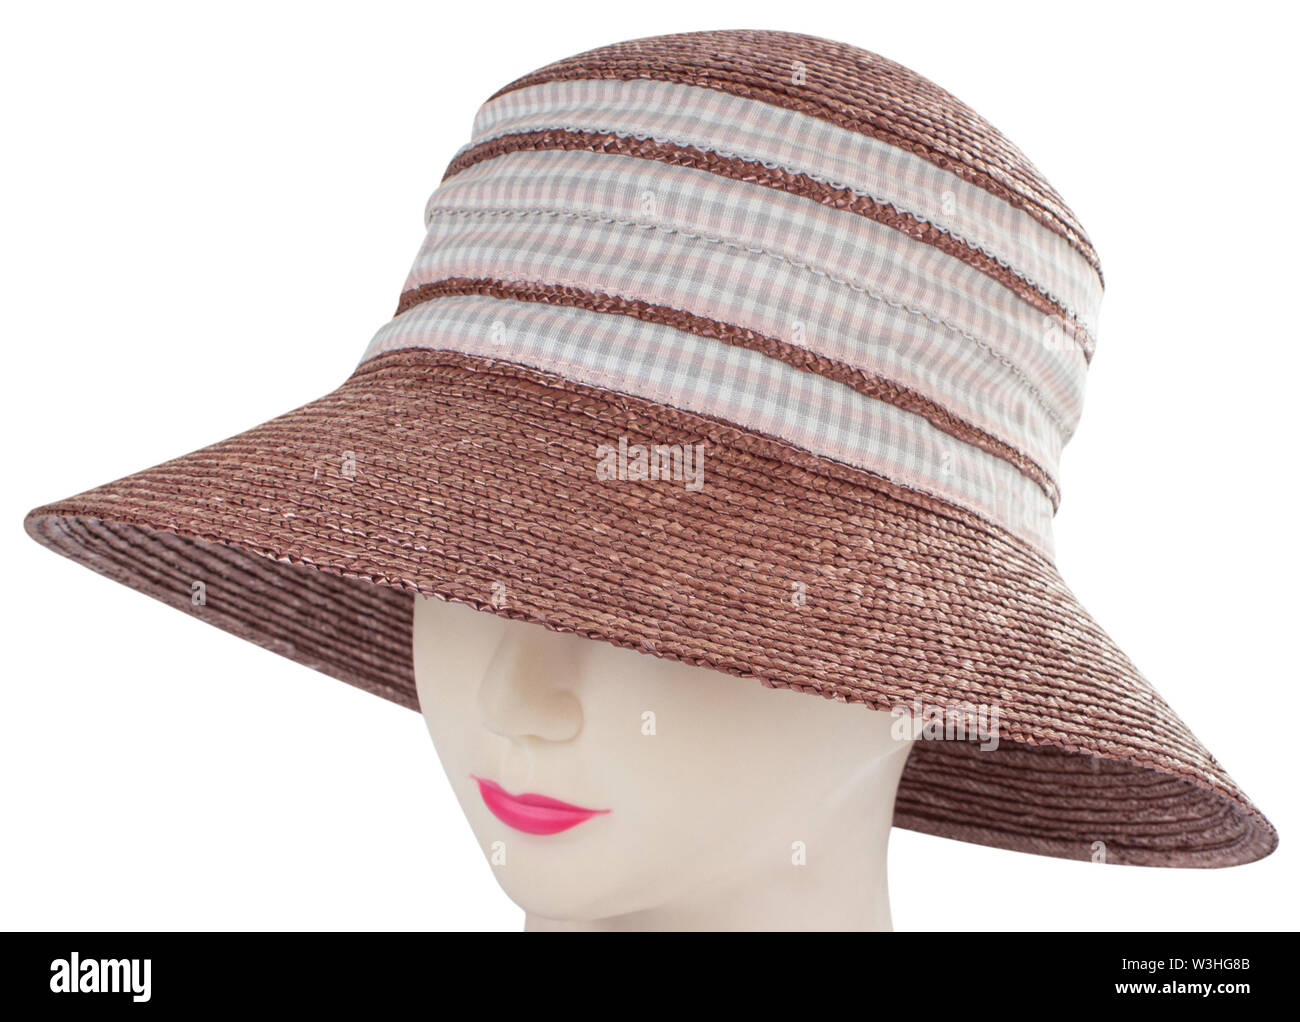 straw hat on mannequin isolated on white background Stock Photo